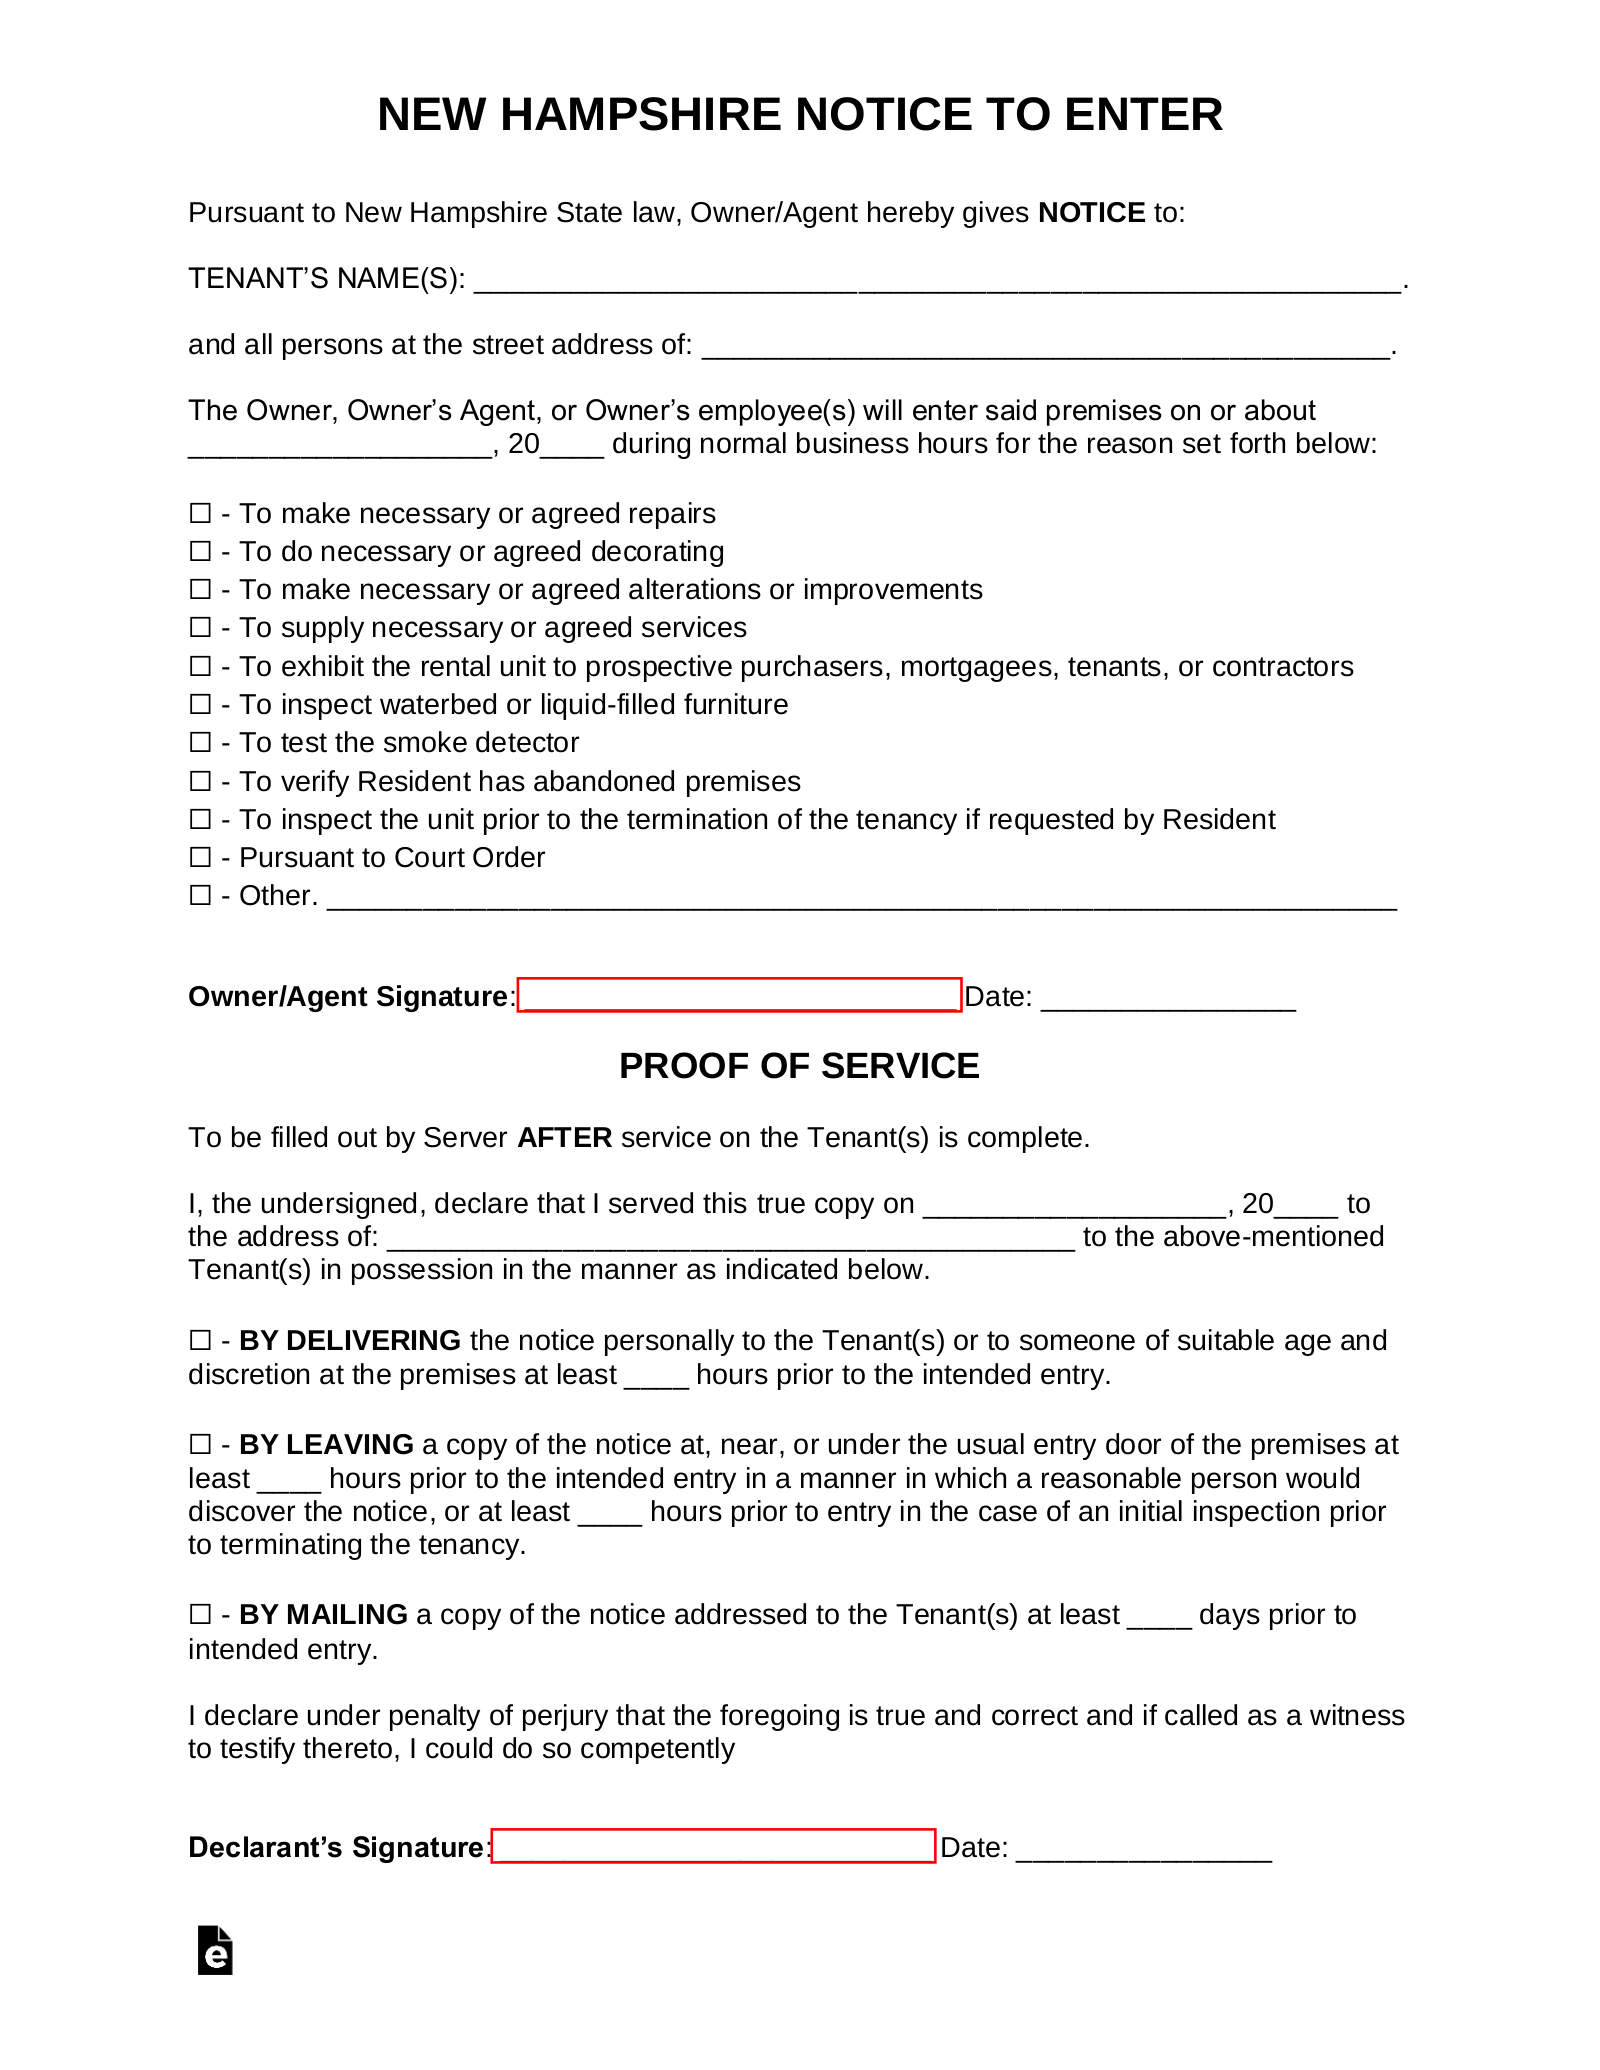 New Hampshire Landlord Notice to Enter Form